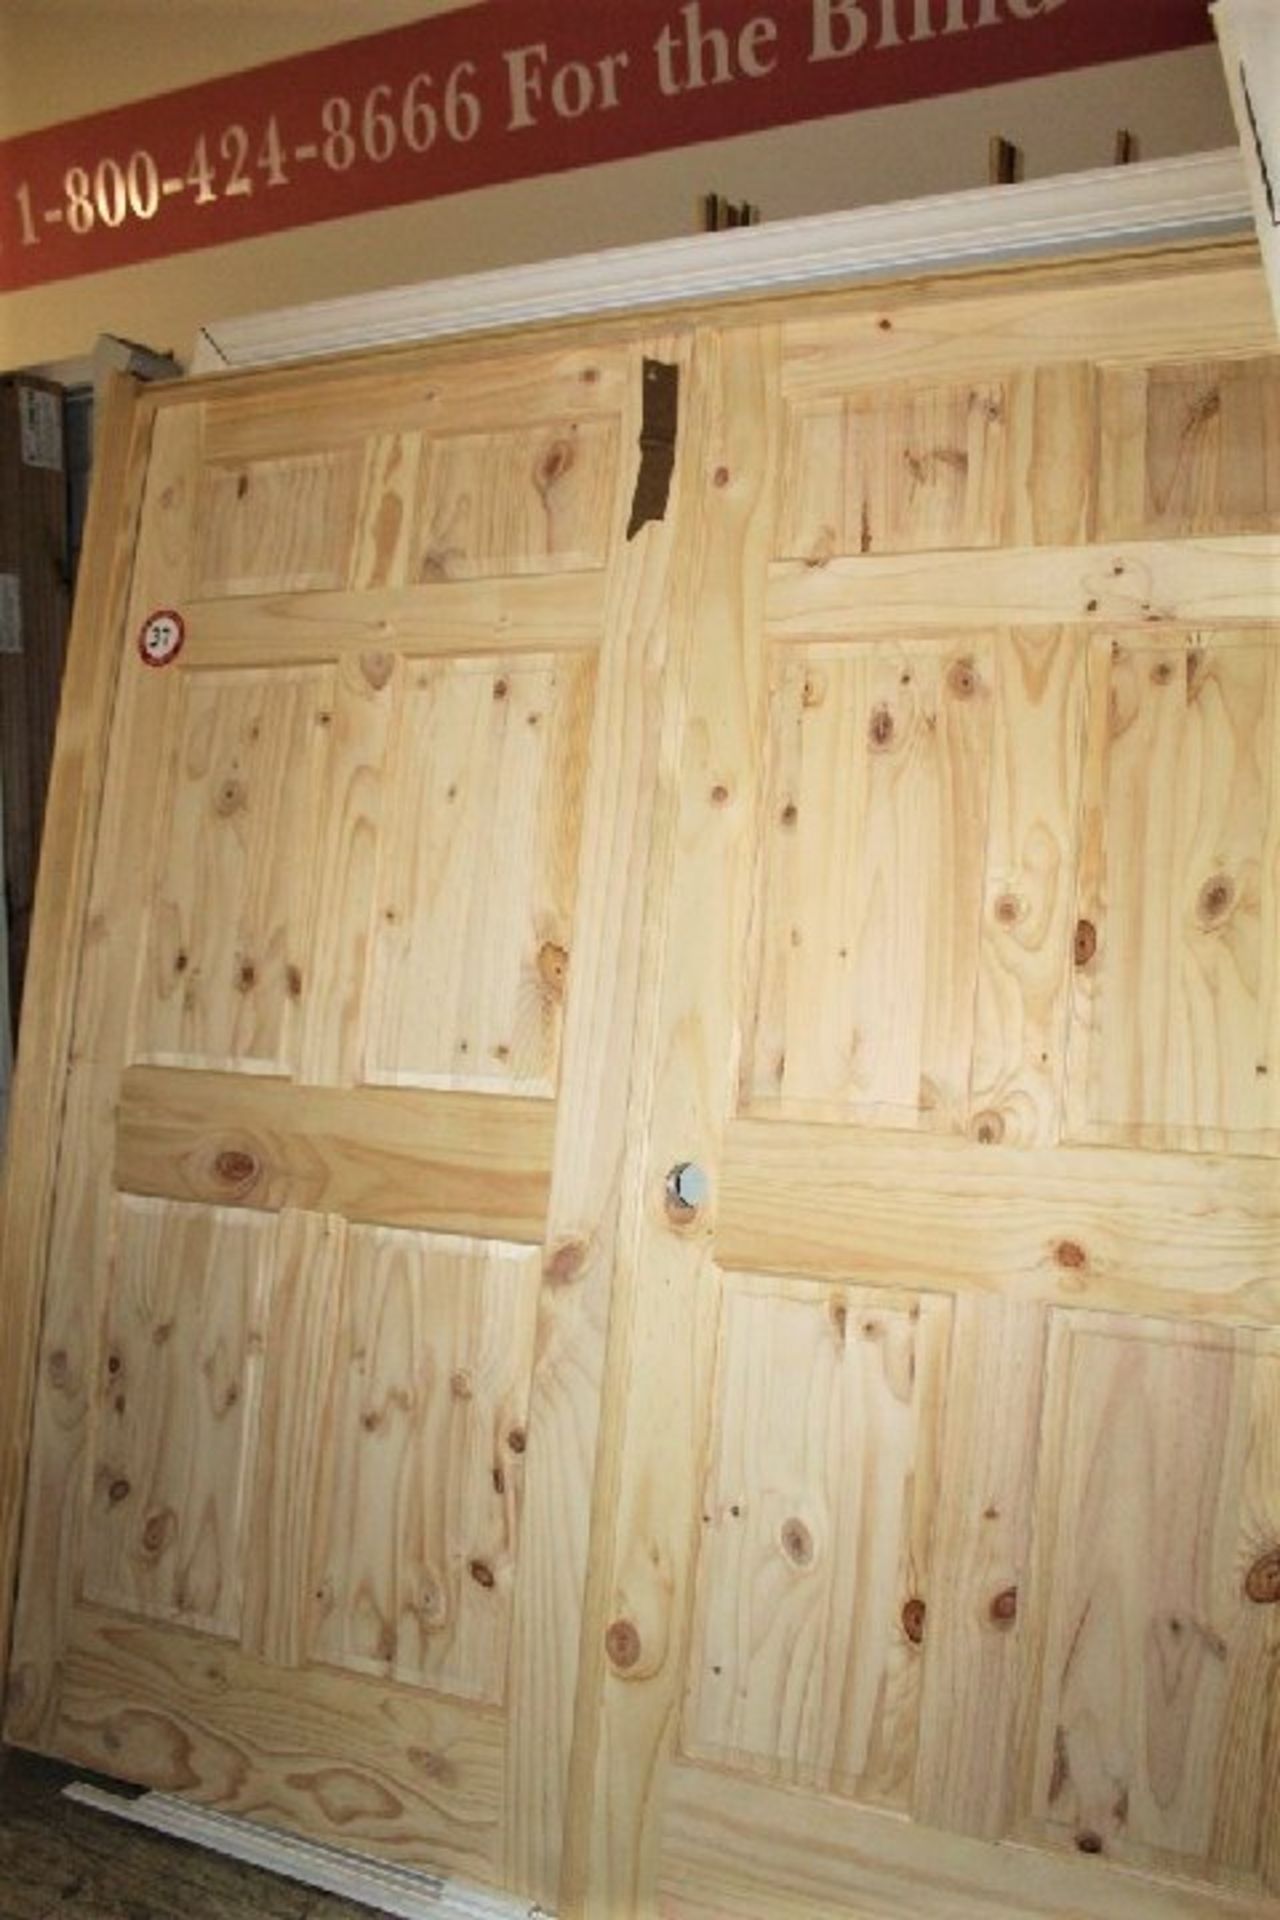 72"x80" Interior Bi-Hinge Double Doors = Quantity of 23. LOCATION: 4313 Clinton Hwy, Knoxville, TN